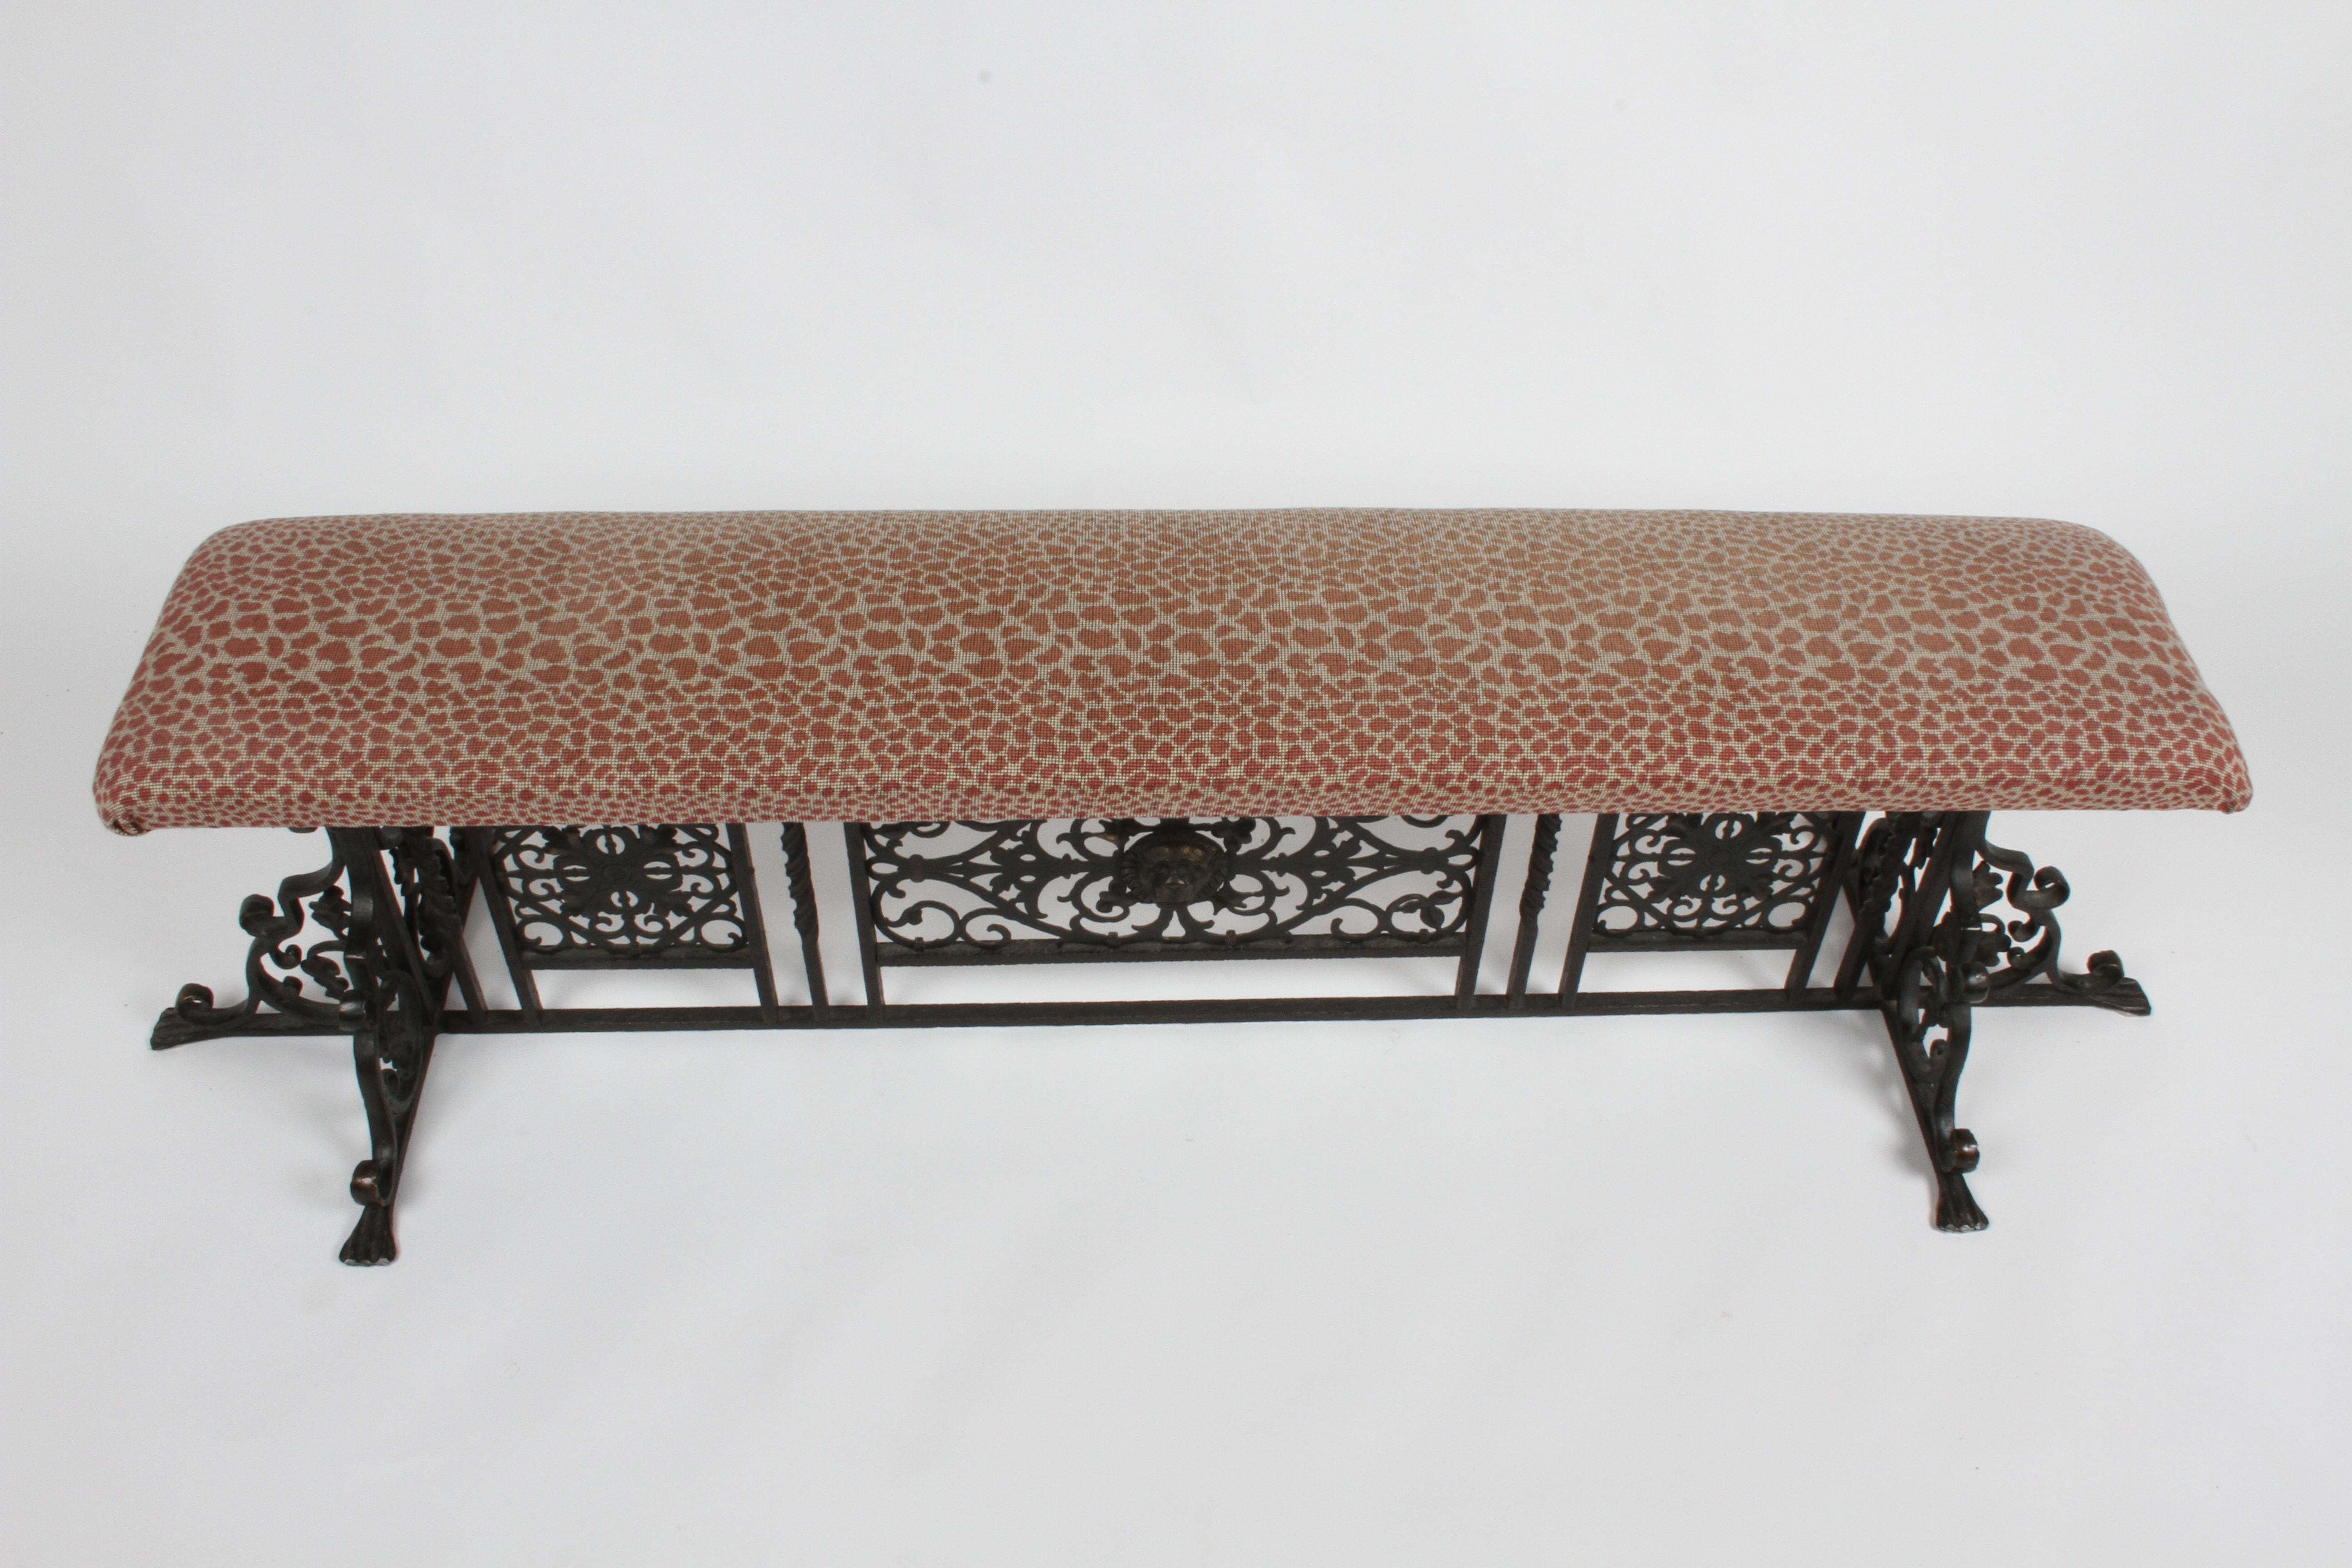 Scarce bronze hall bench designed by famed designer Oscar Bruno Bach (1884-1957). Over 6' bench with lion head, hand wrought, hammered, twisted bronze and fret work on faux leopard print upholstery seat cushion. Signed to the underside with Bach